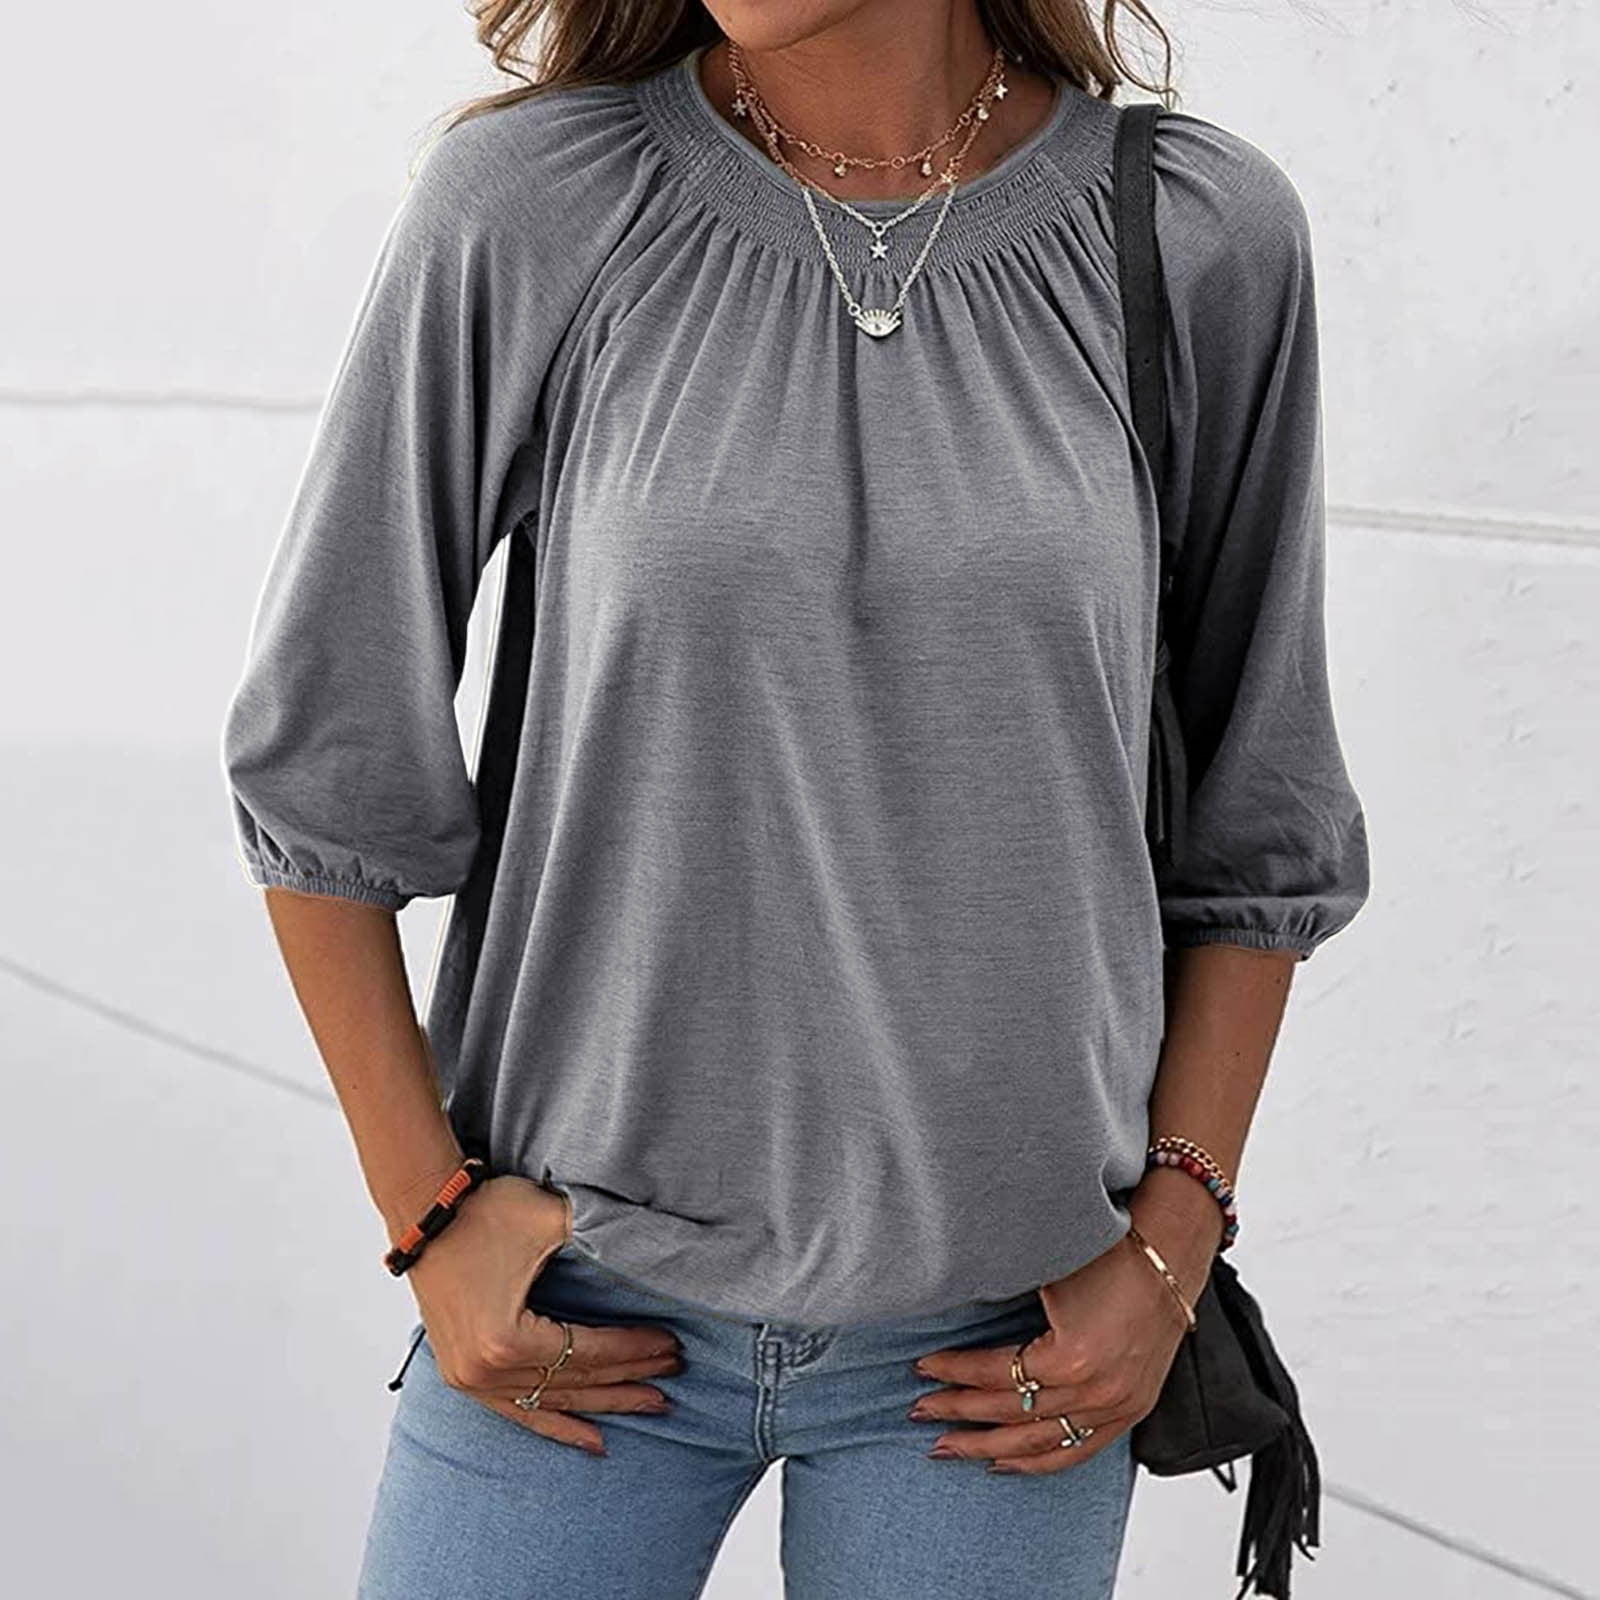 Womens Summer Basic 3/4 Sleeve Round Neck Casual Loose Fit Plus Size T-Shirt Cotton Blouse Tops White